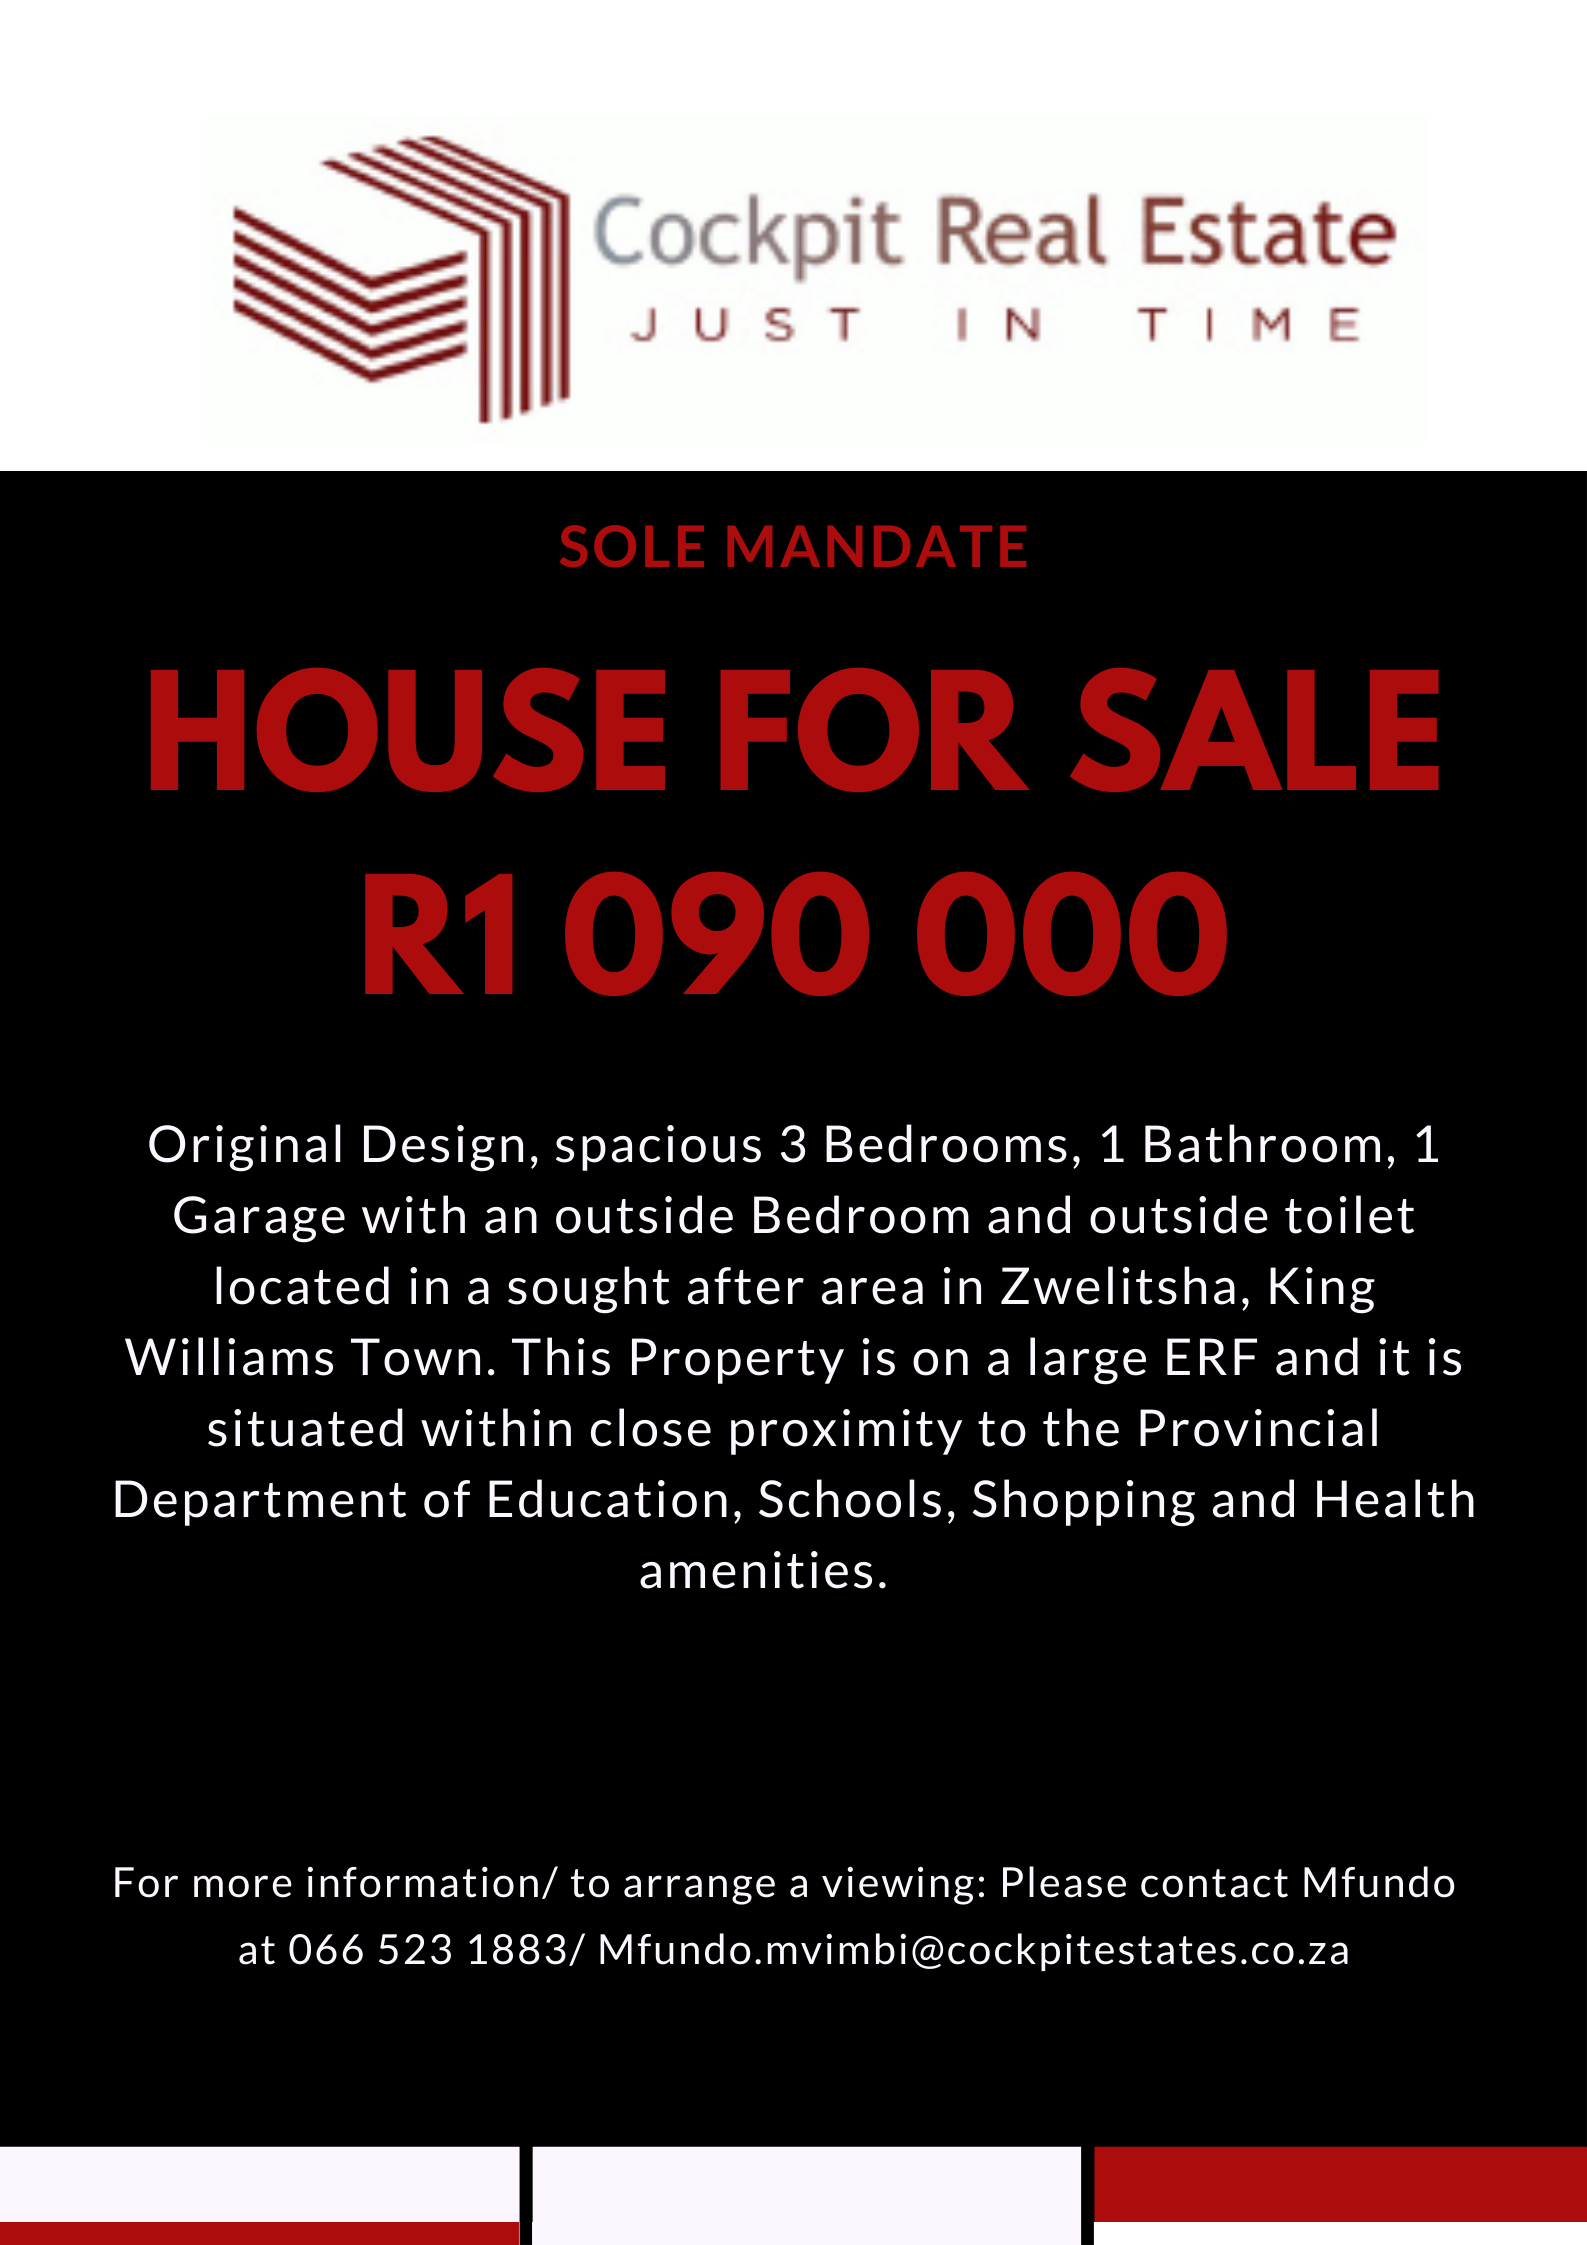 House available on a large ERF in  Zwelitsha. Ideal opportunity as it is located in an area which has lots of investment potential.